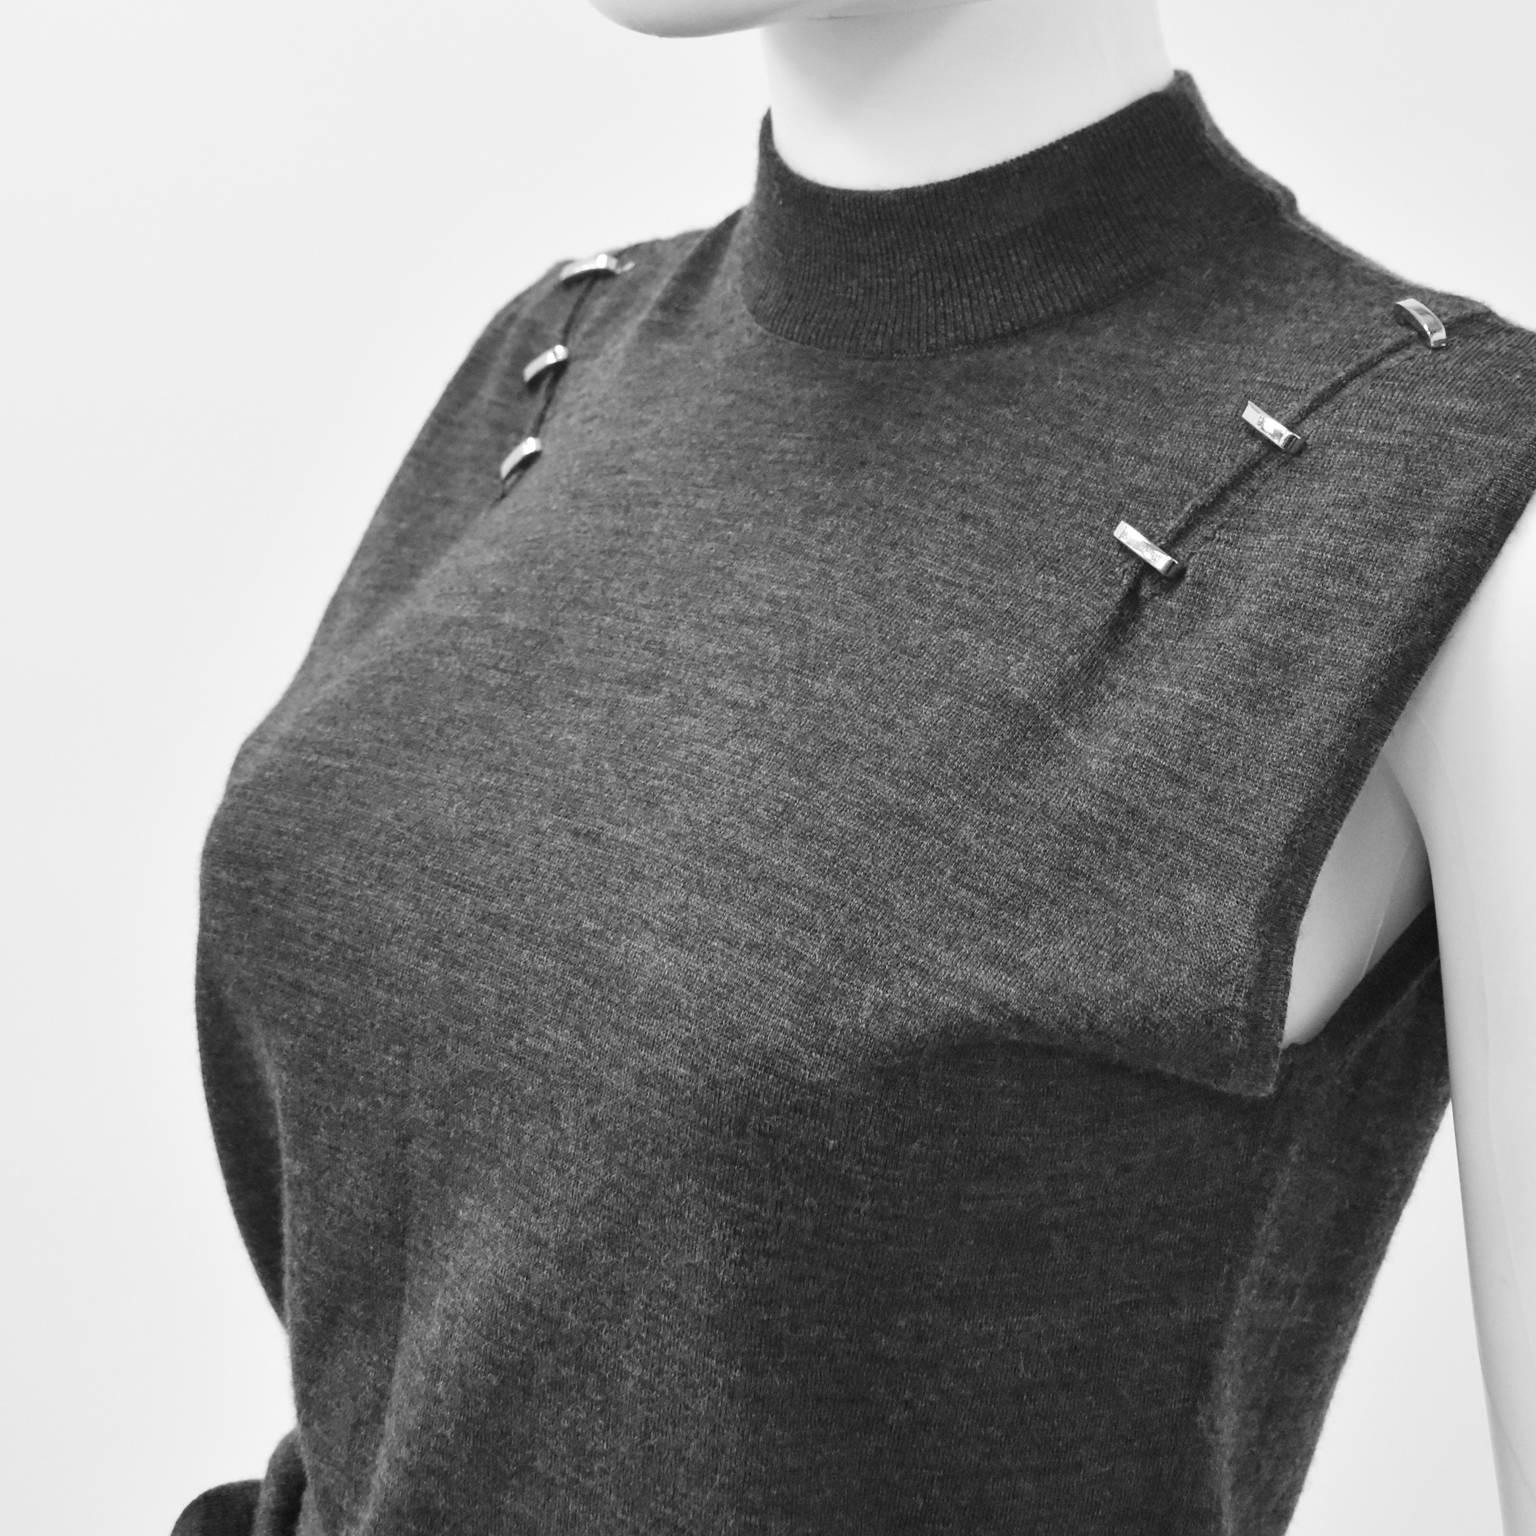 Black Paco Rabanne Grey Wool Knit Top with Silver Hardware Details For Sale